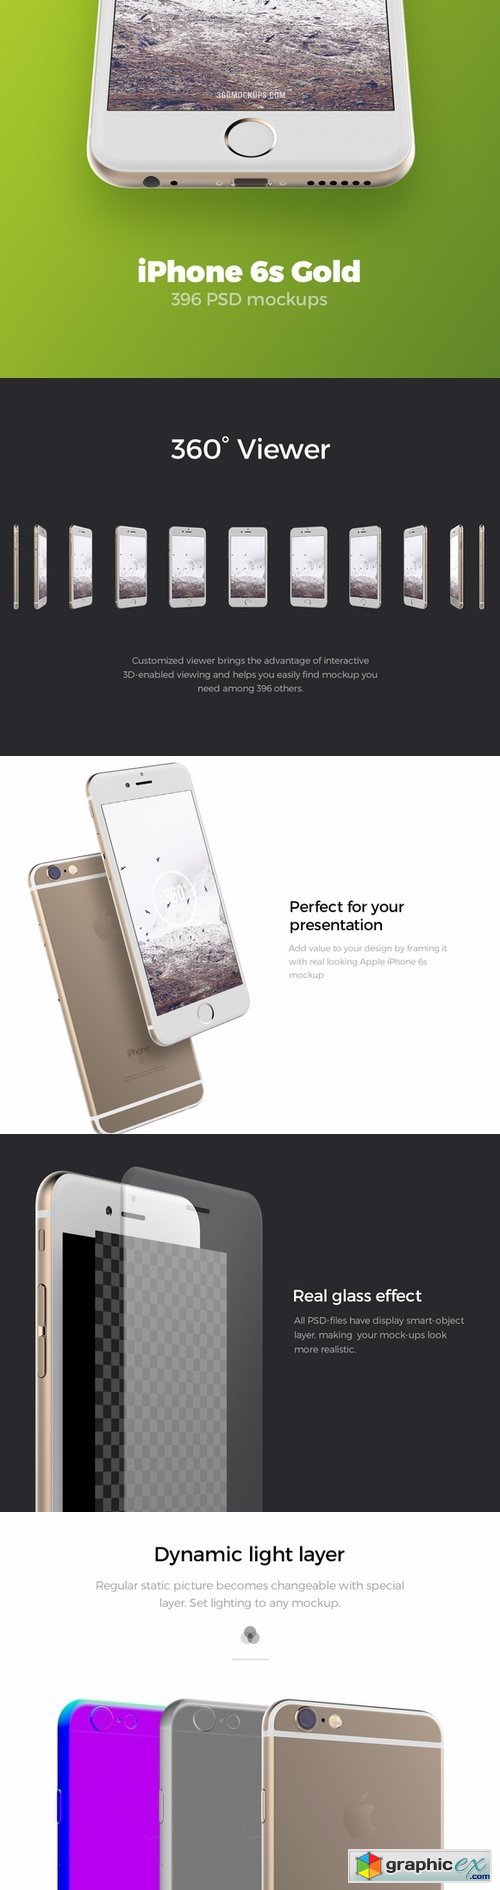 iPhone 6s Gold Mockups